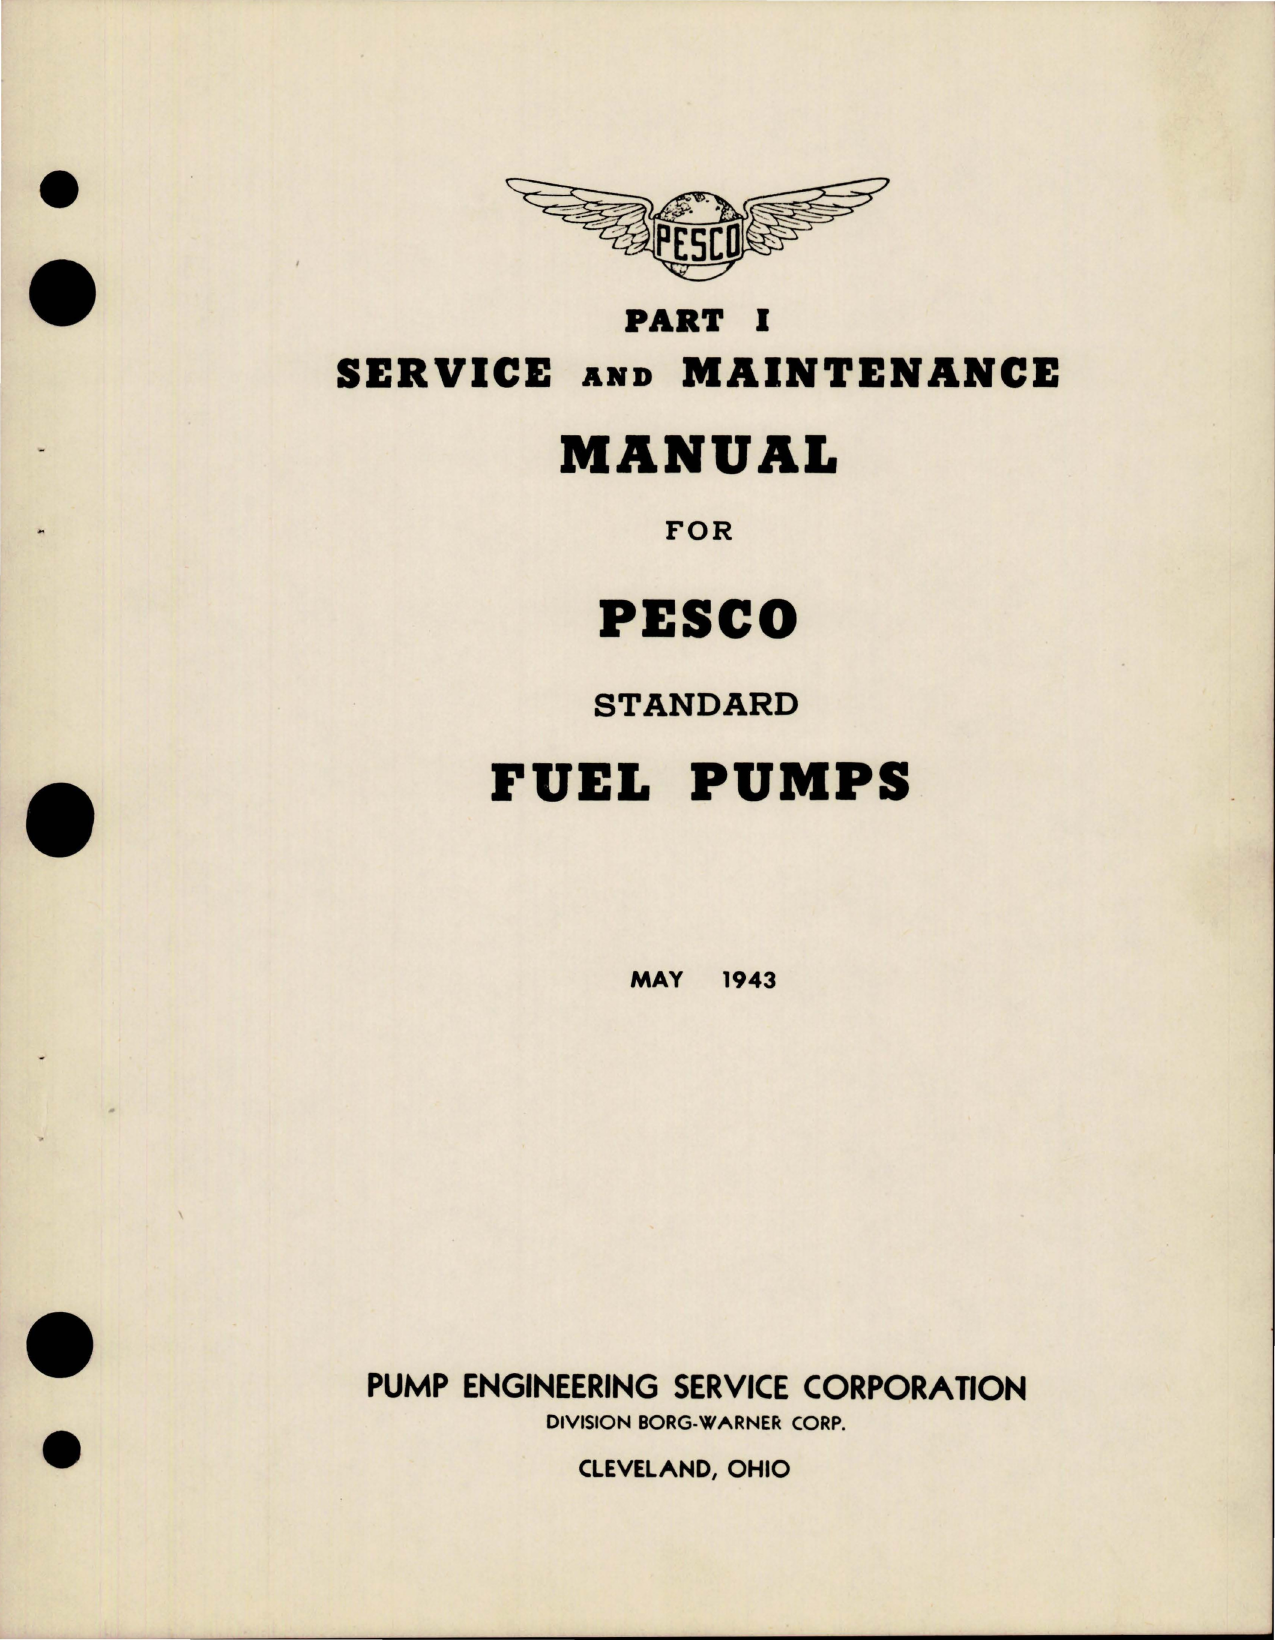 Sample page 7 from AirCorps Library document: Operation, Service, and Overhaul Instructions with Parts for Electric Motor Driven Fuel Pumps 